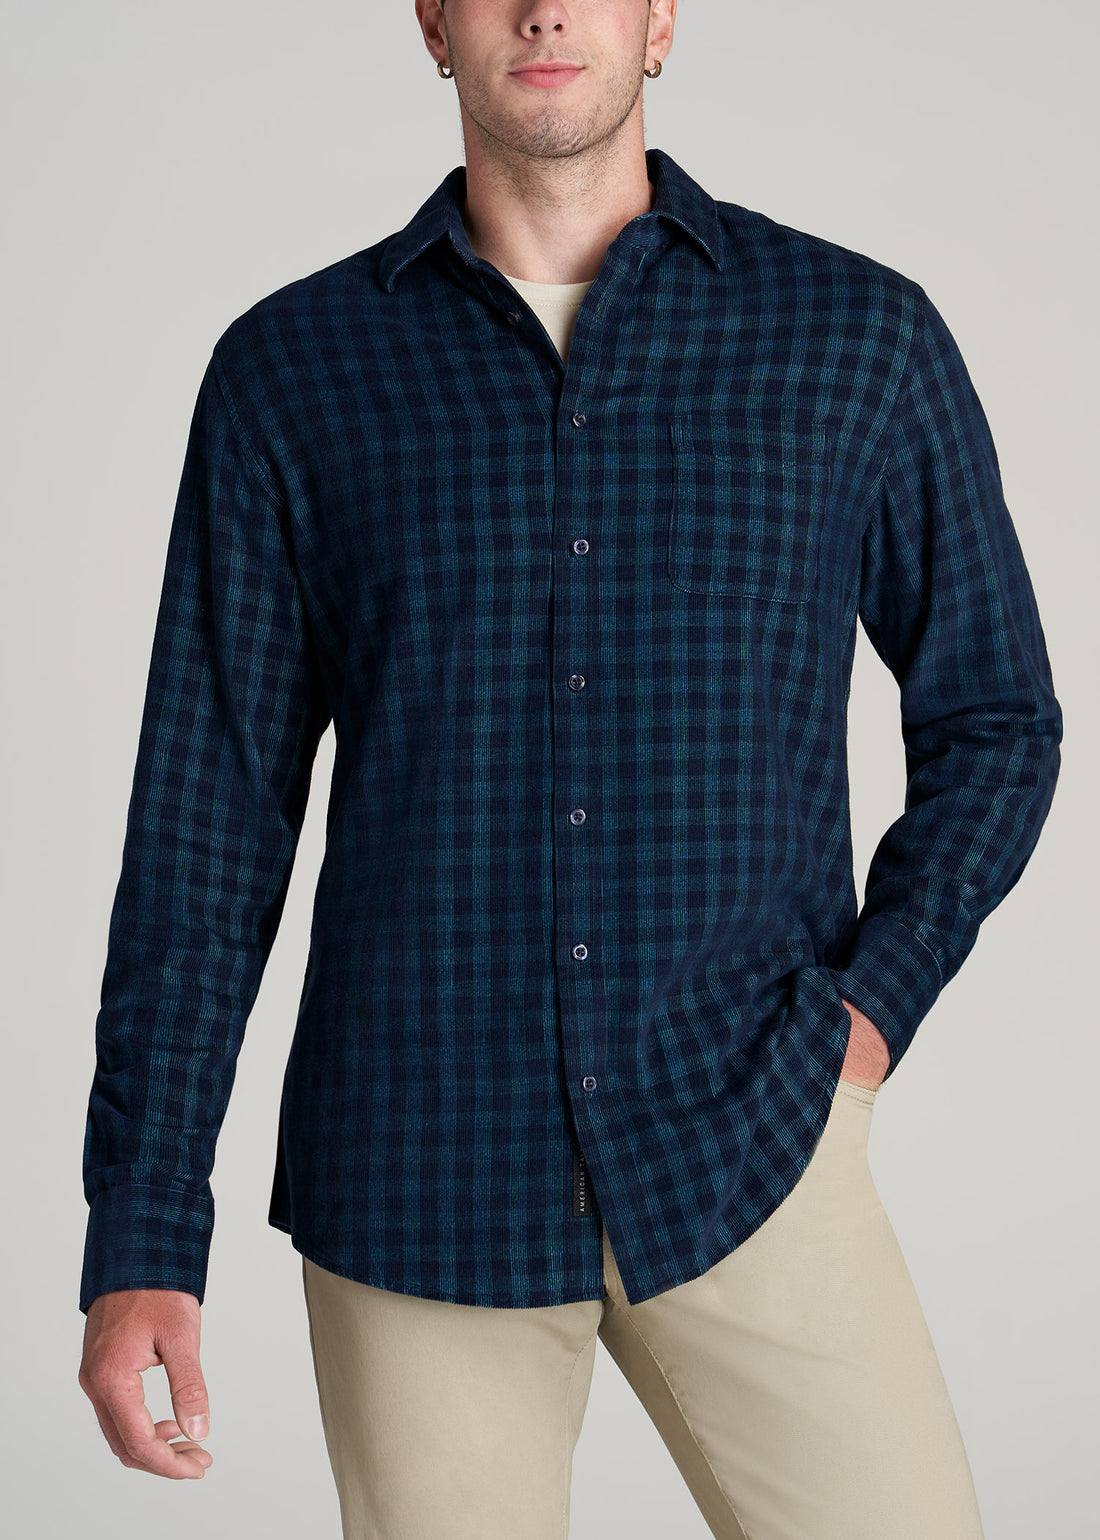 Tall man wearing American Tall's Baby Wale Corduroy Button Shirt in Teal and Navy Plaid.